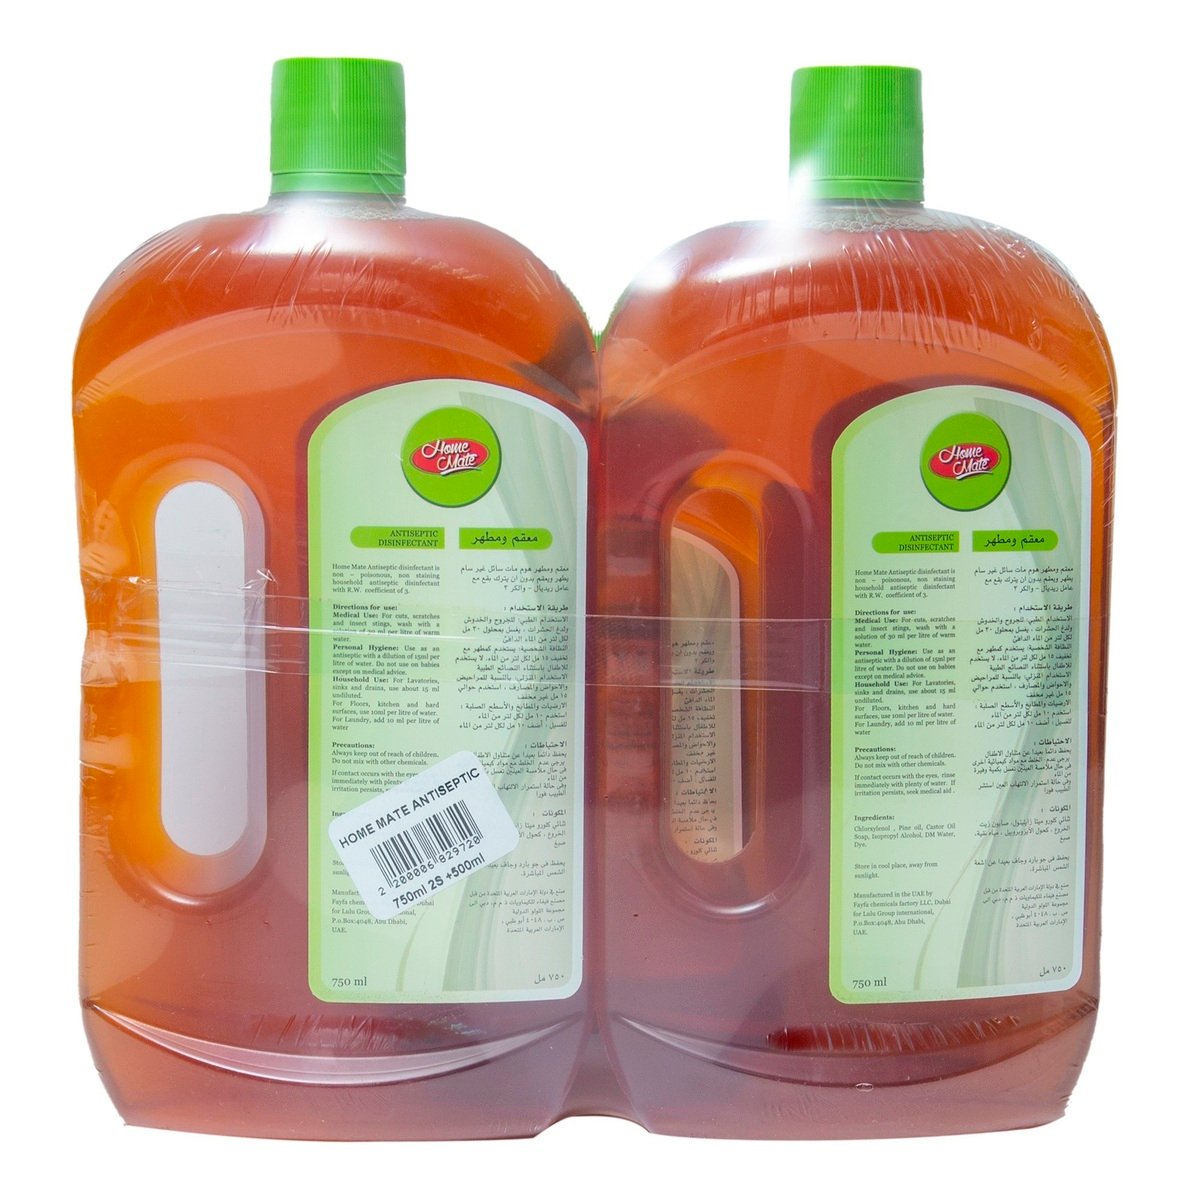 Home Mate Antiseptic Disinfectant 2 x 750ml + 500ml